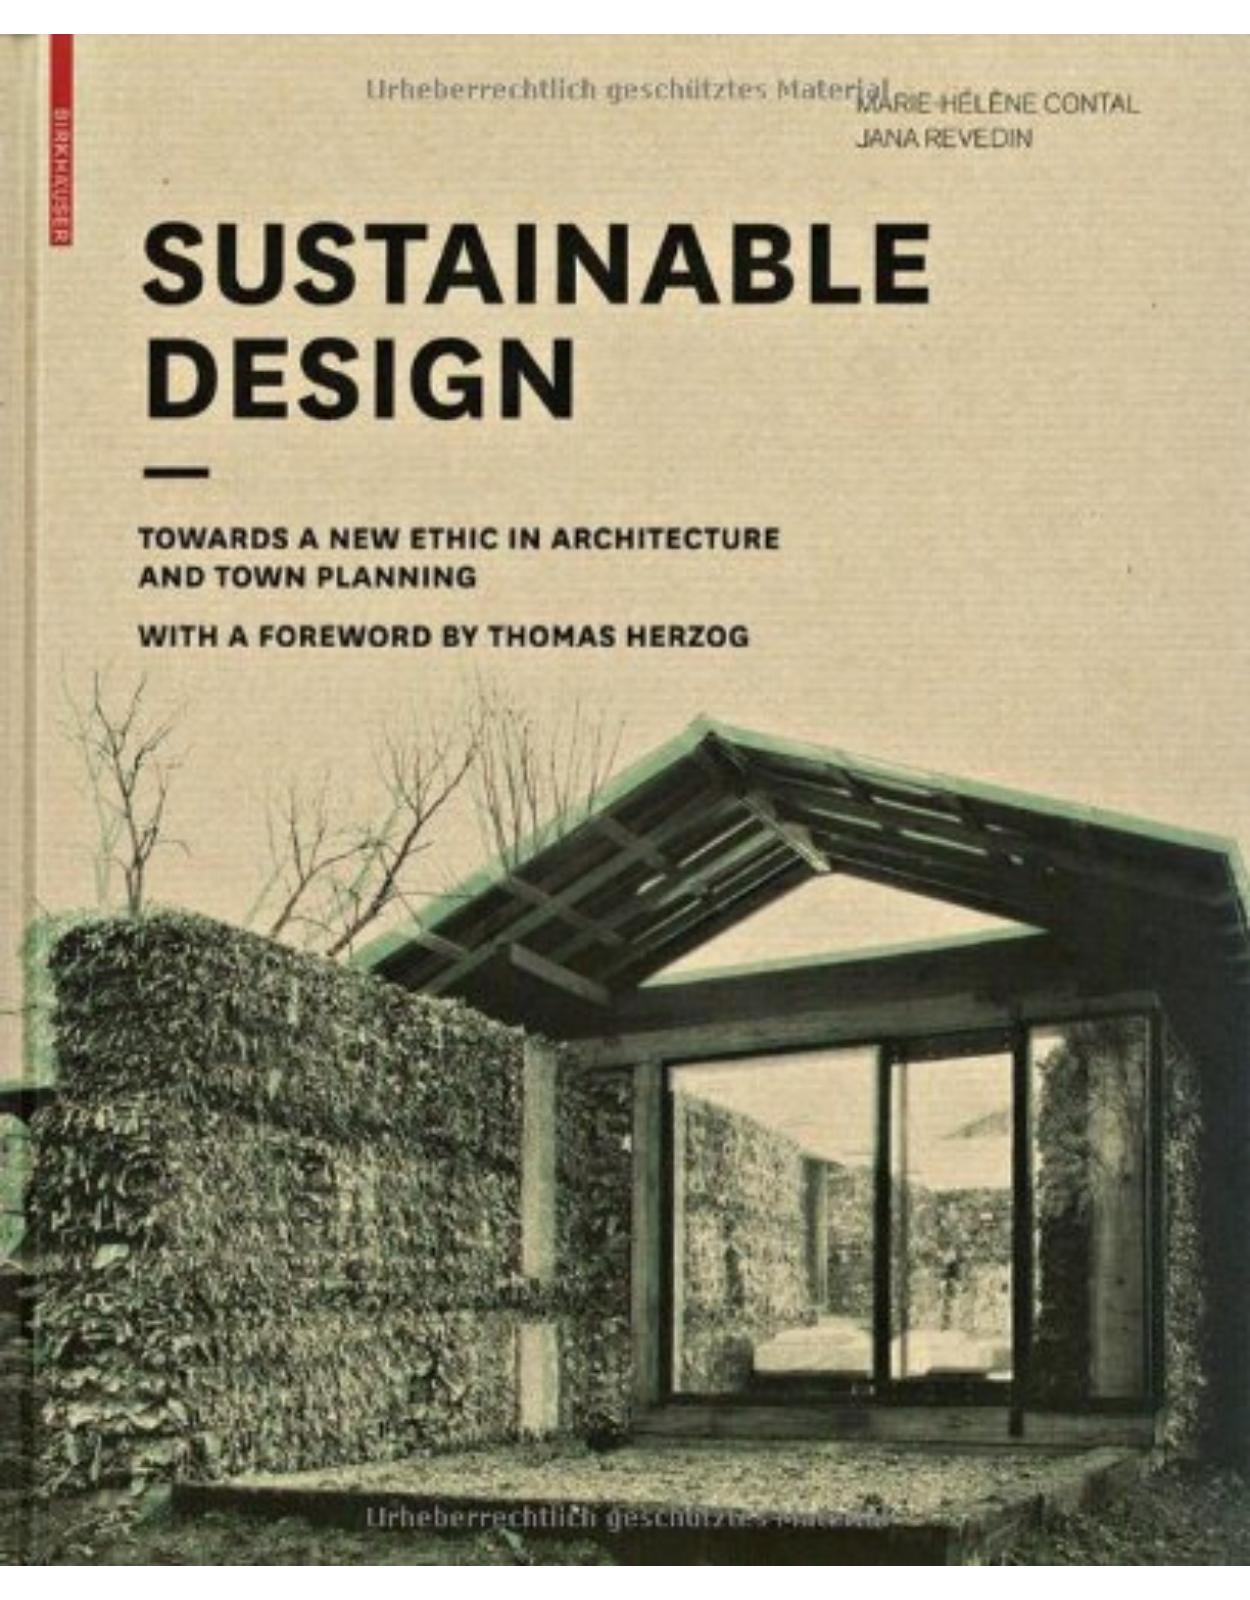 Sustainable Design: Towards a New Ethic in Architecture and Town Planning